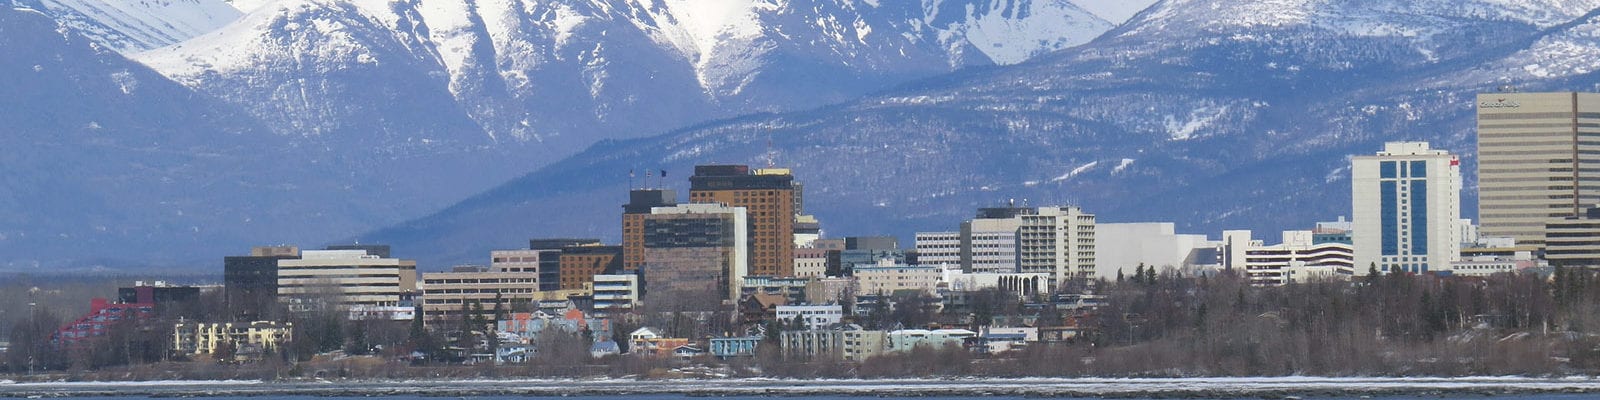 Downtown Anchorage, Alaska photographed from a boat several hundred meters from the shore.